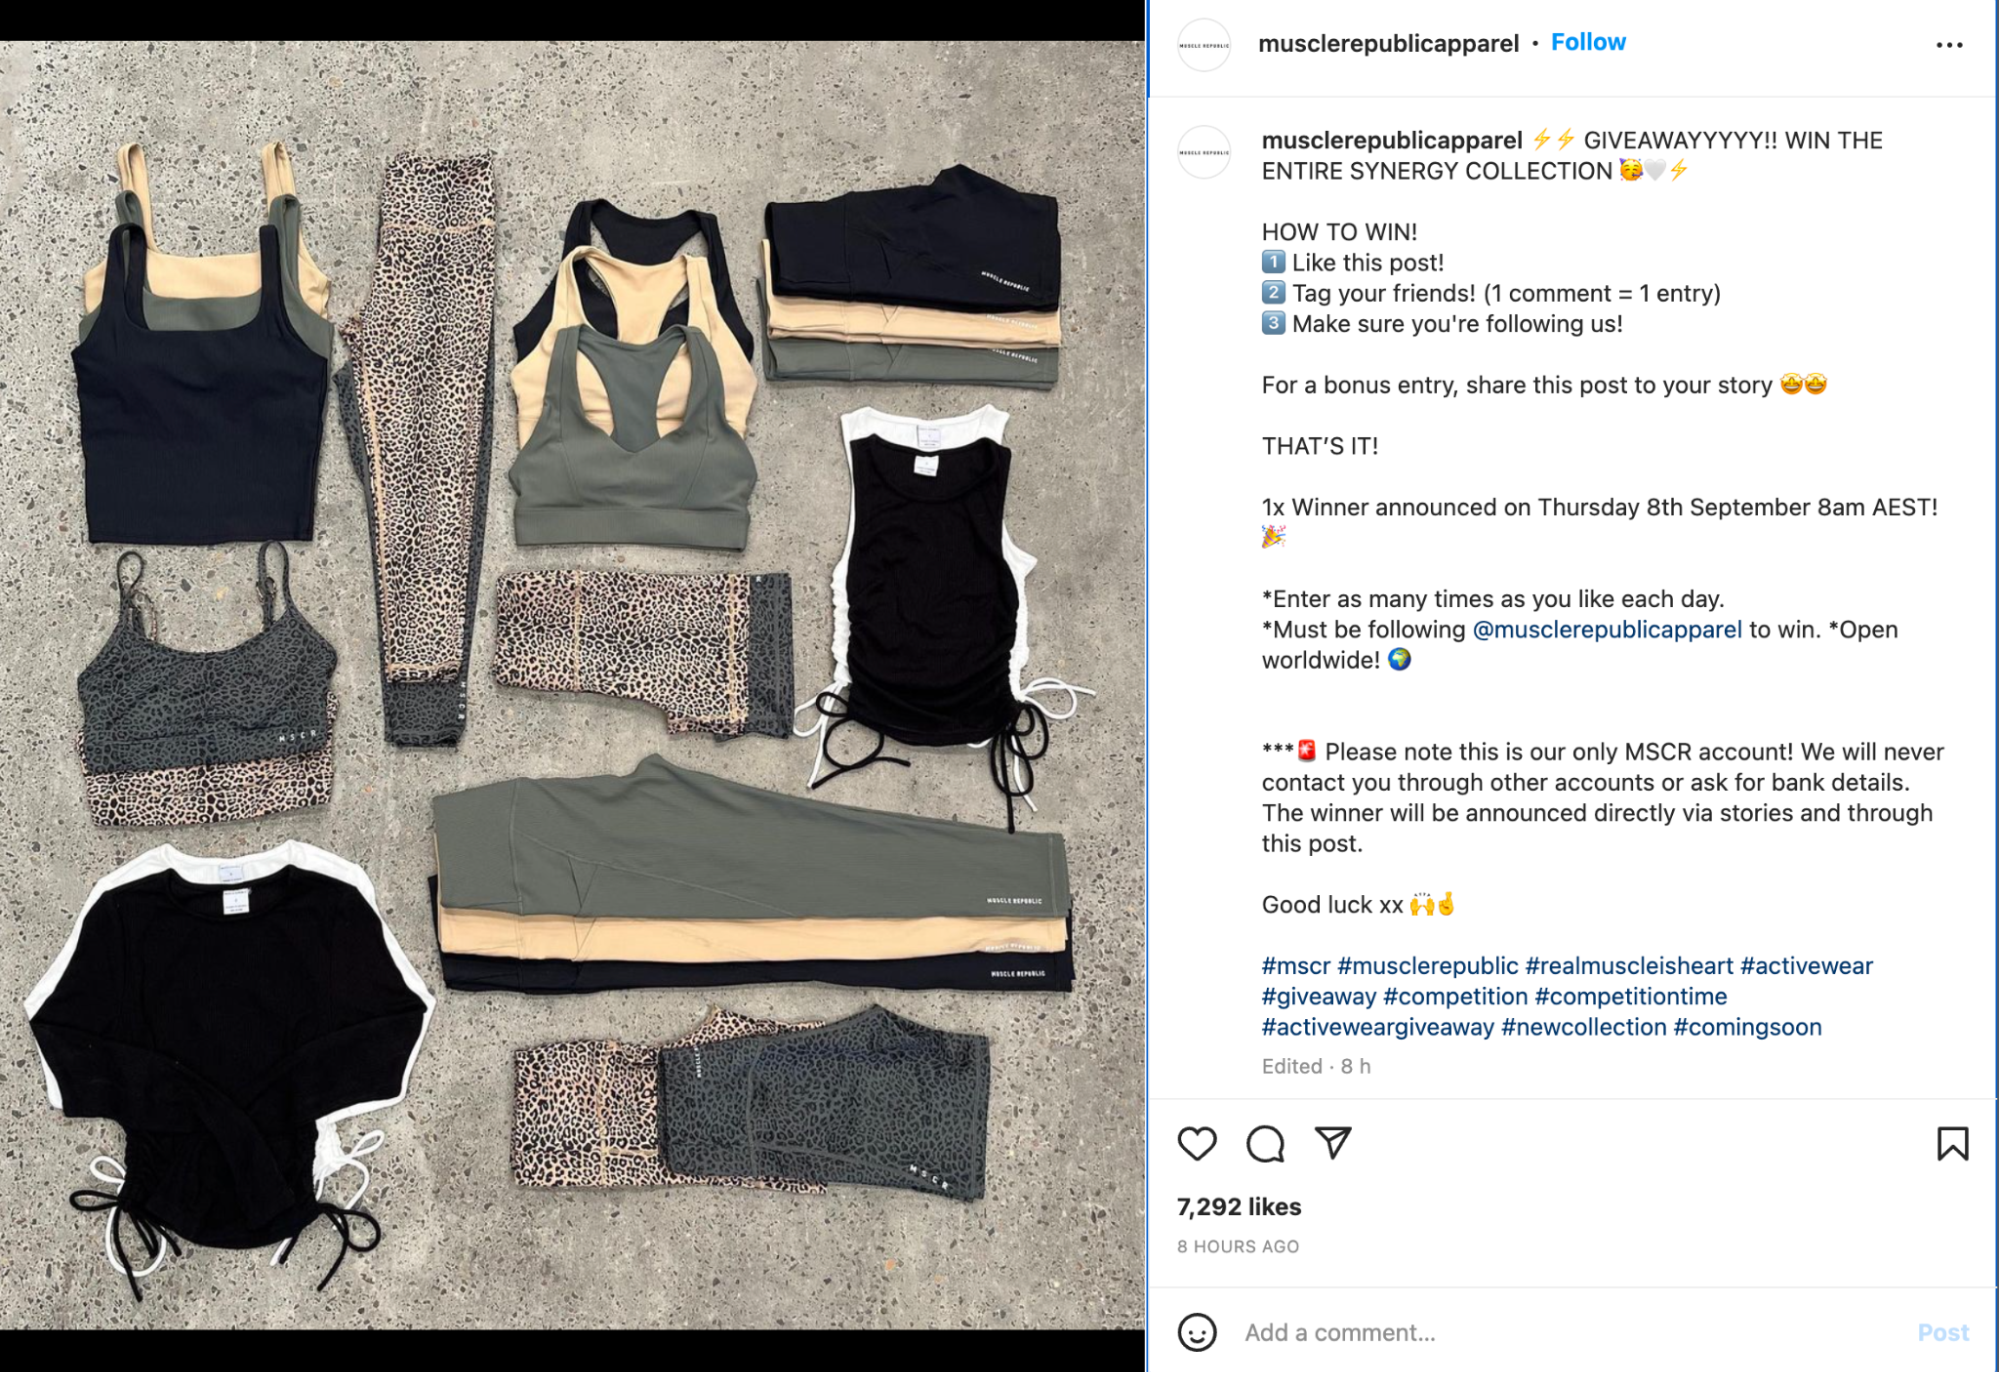 Instagram contest containing a flat lay photo of women’s activewear.